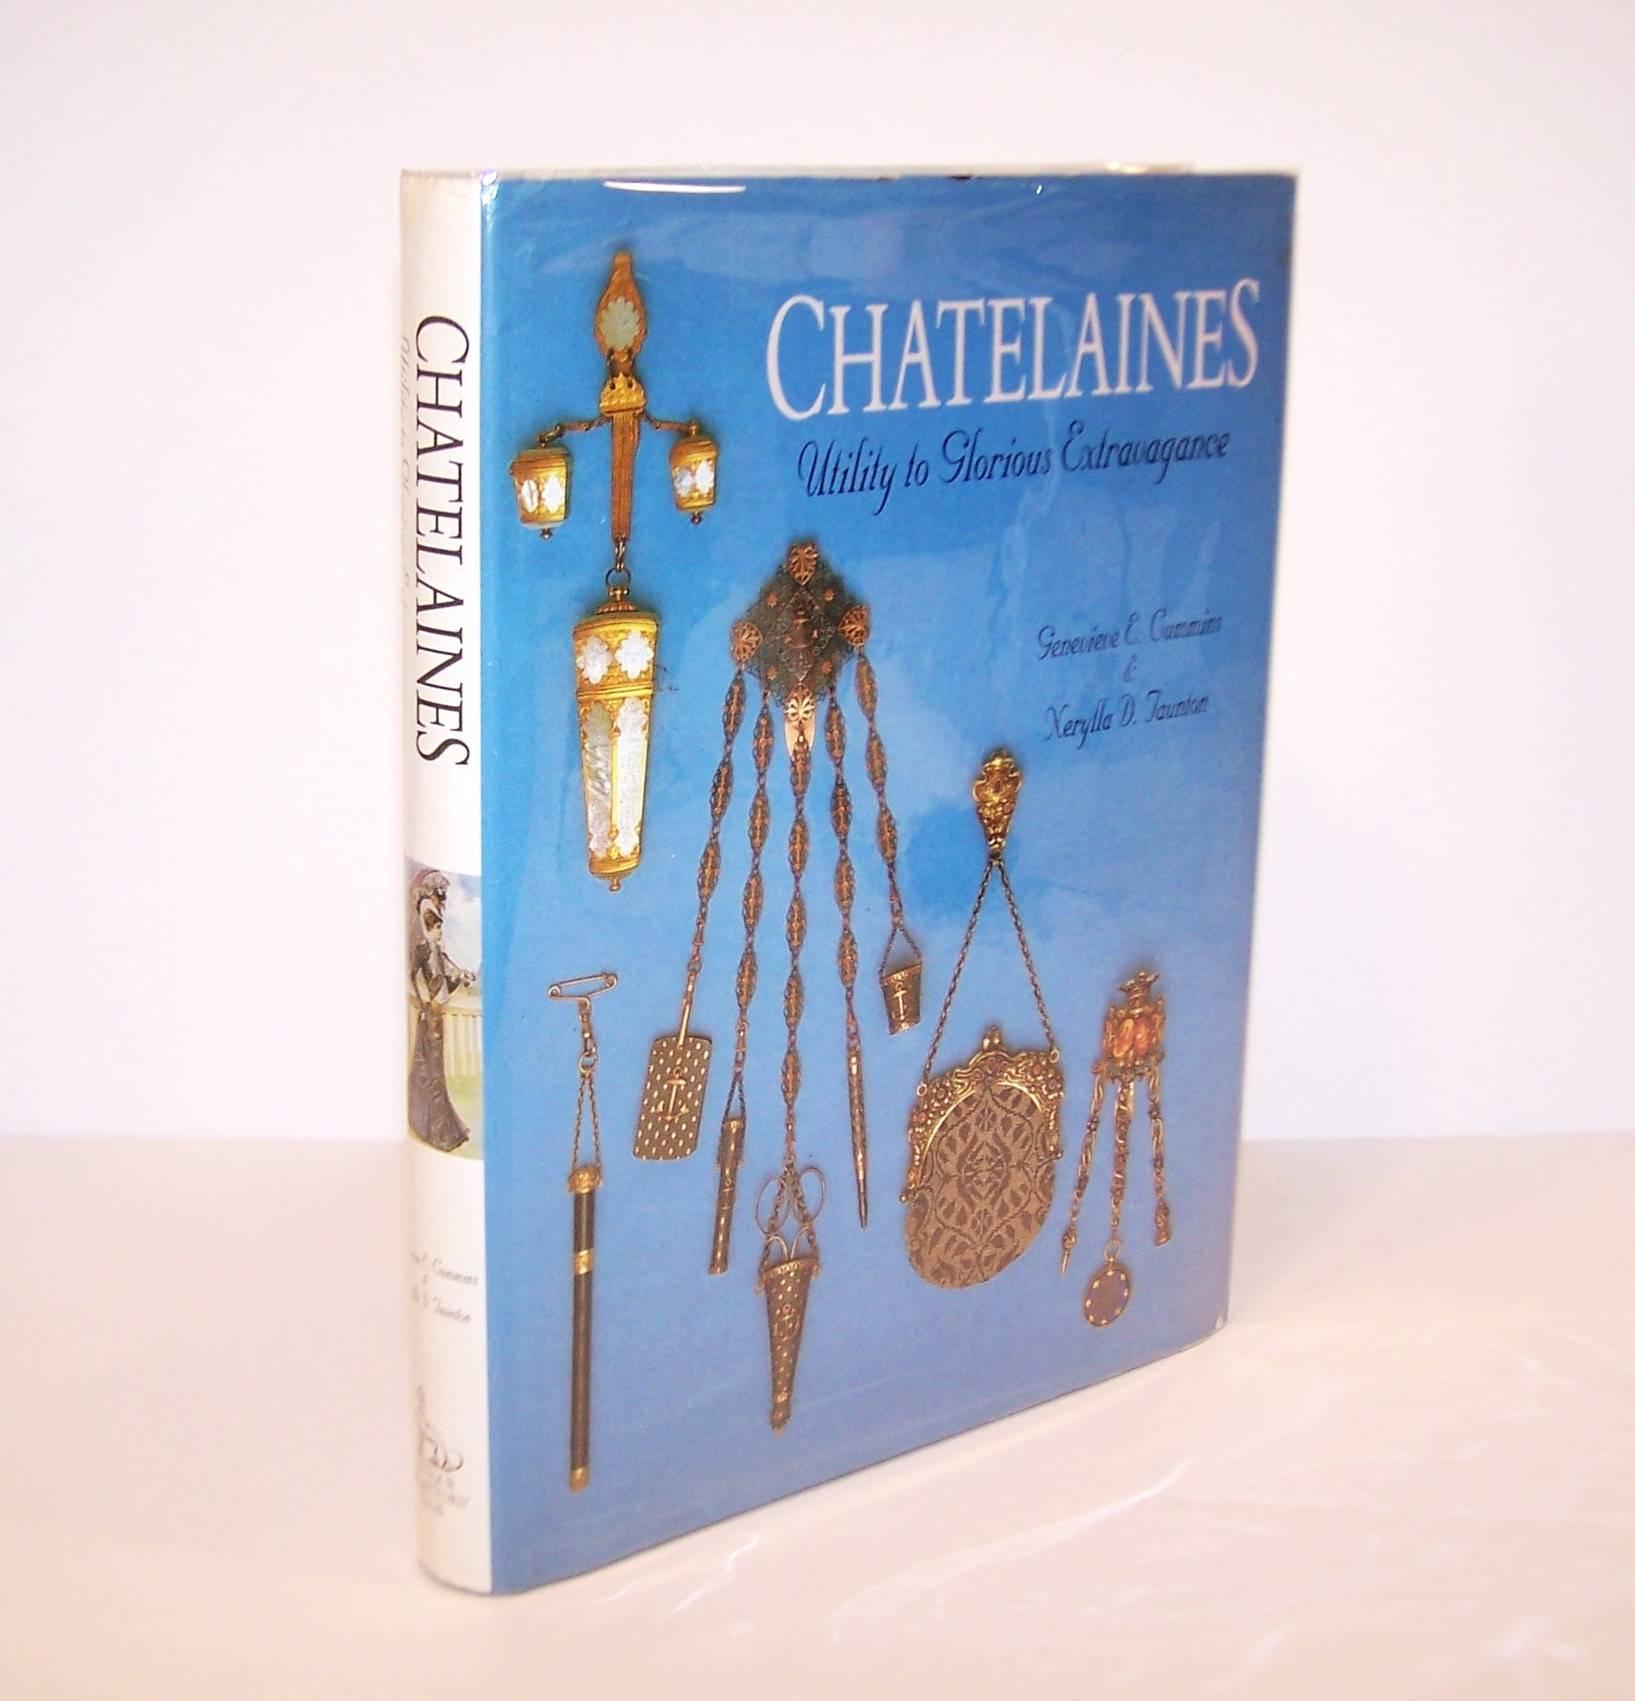 If chatelaines are your thing then curl up with this book for a good dose of eye candy ... if you don't know much about chatelaines then you will have a great appreciation after reading this book.  Written by Genevieve Cummins and Nerylla Taunton,